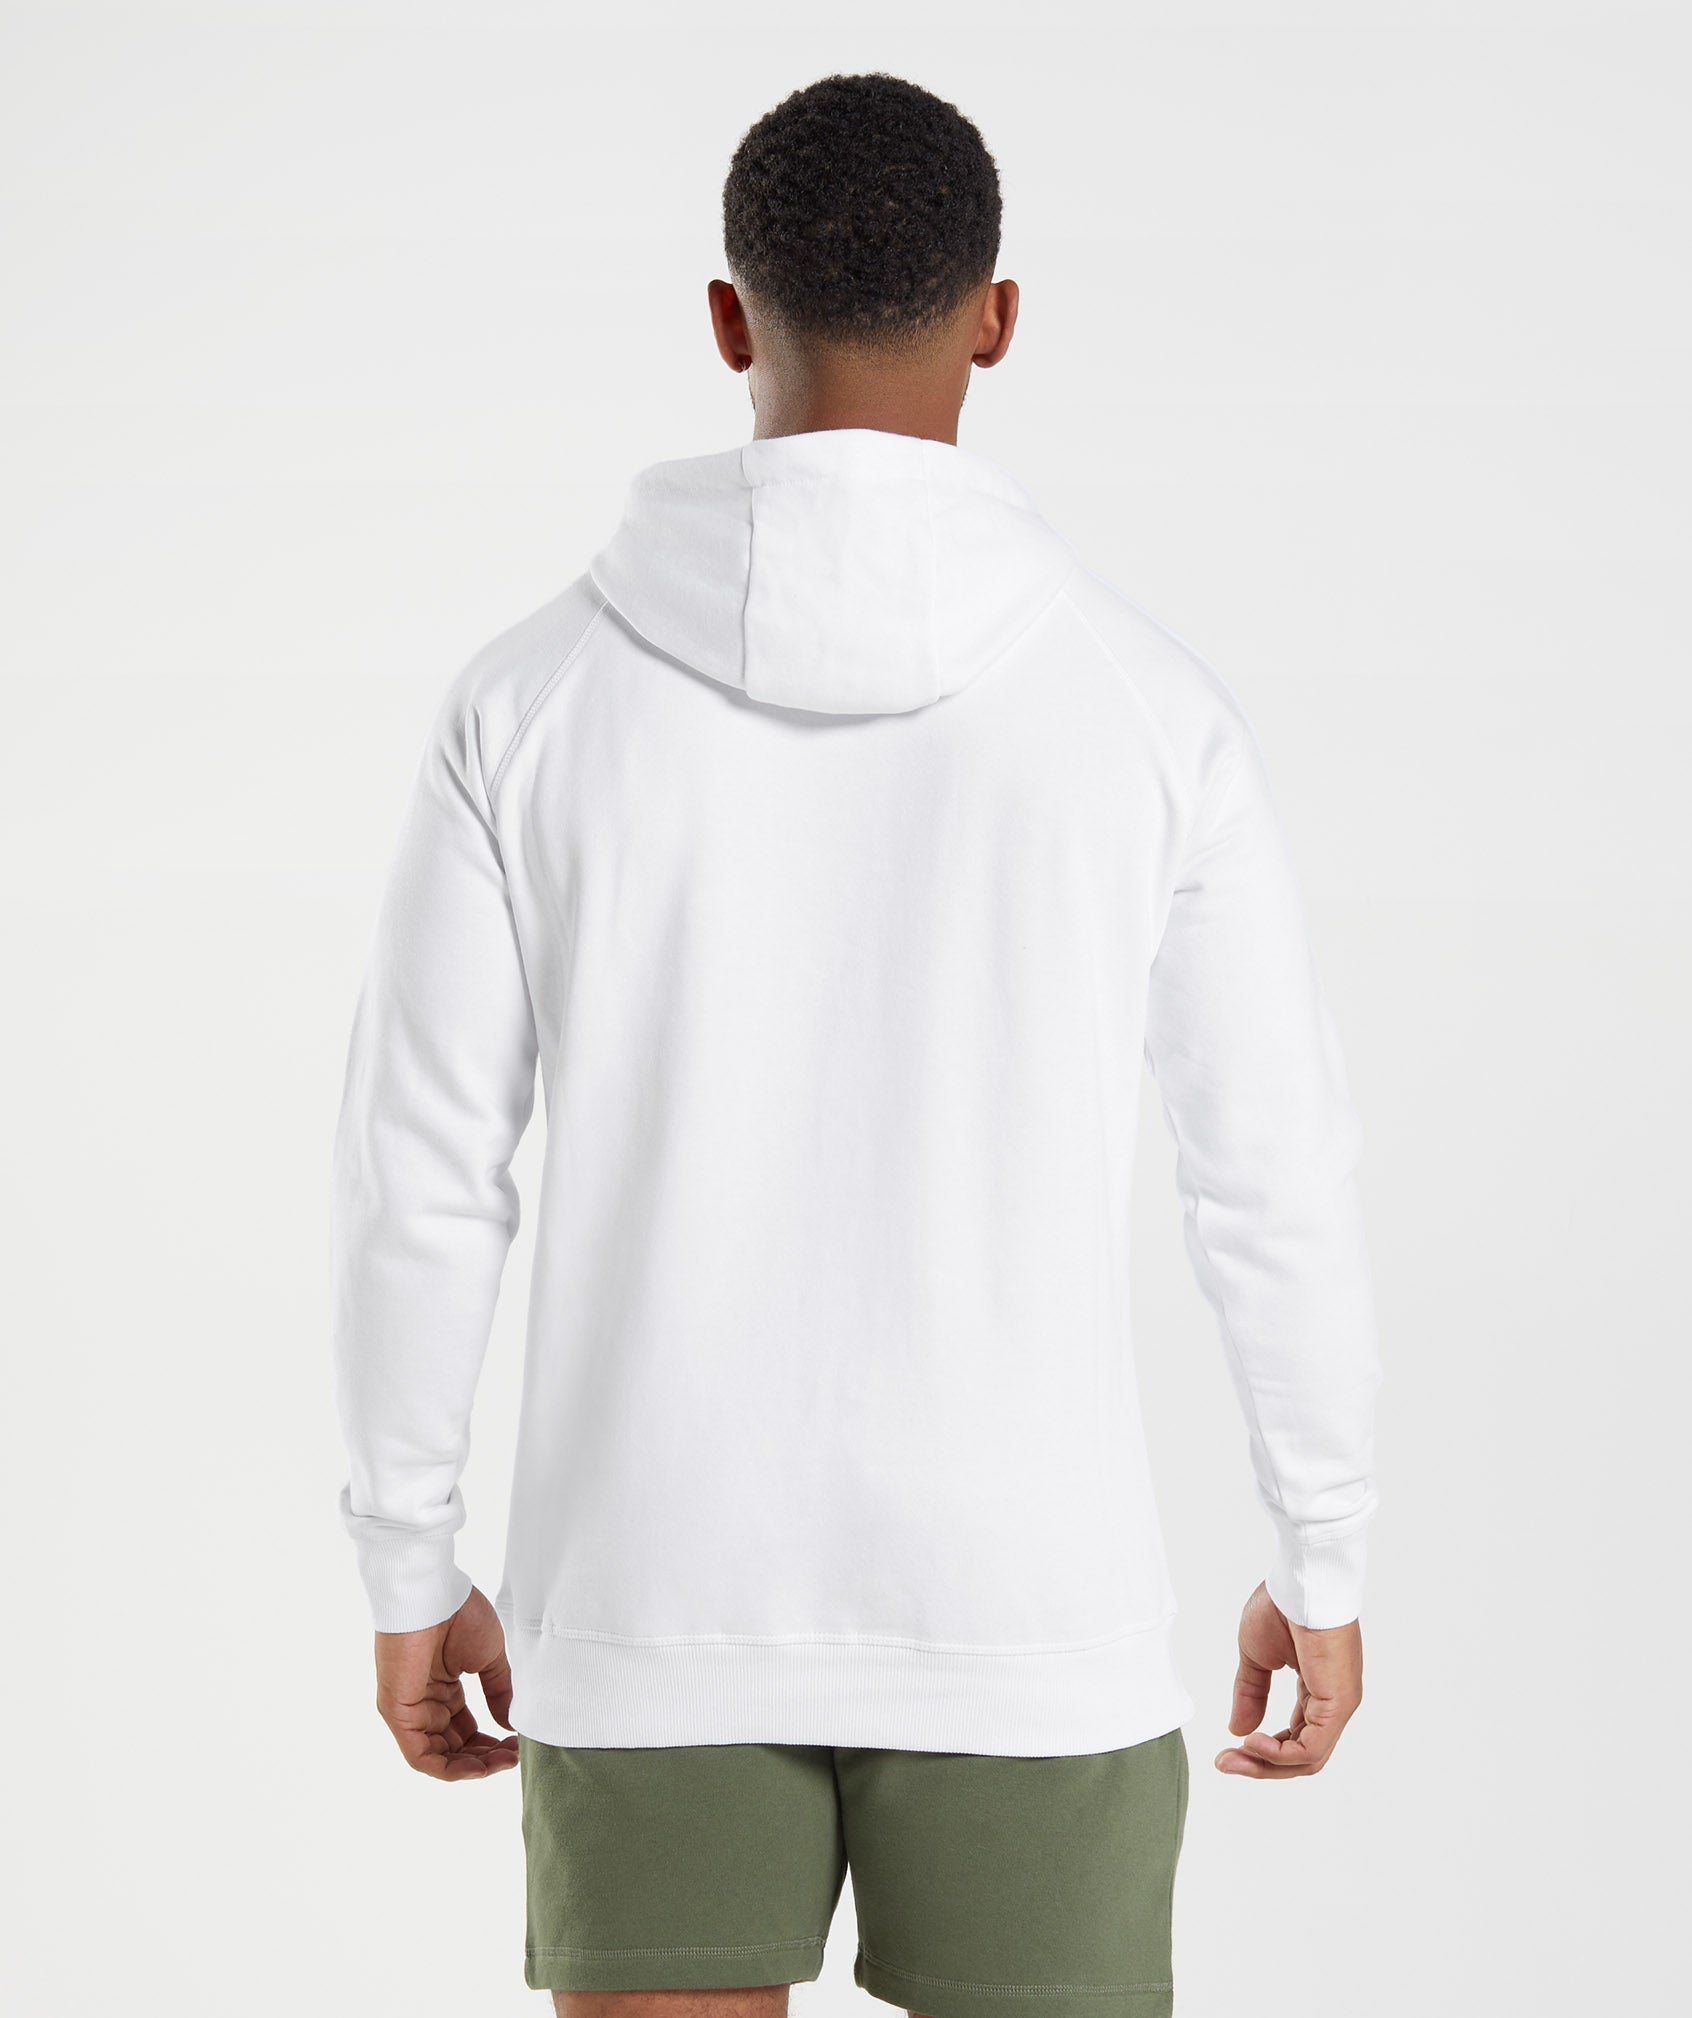 Crest Hoodie in White - view 2